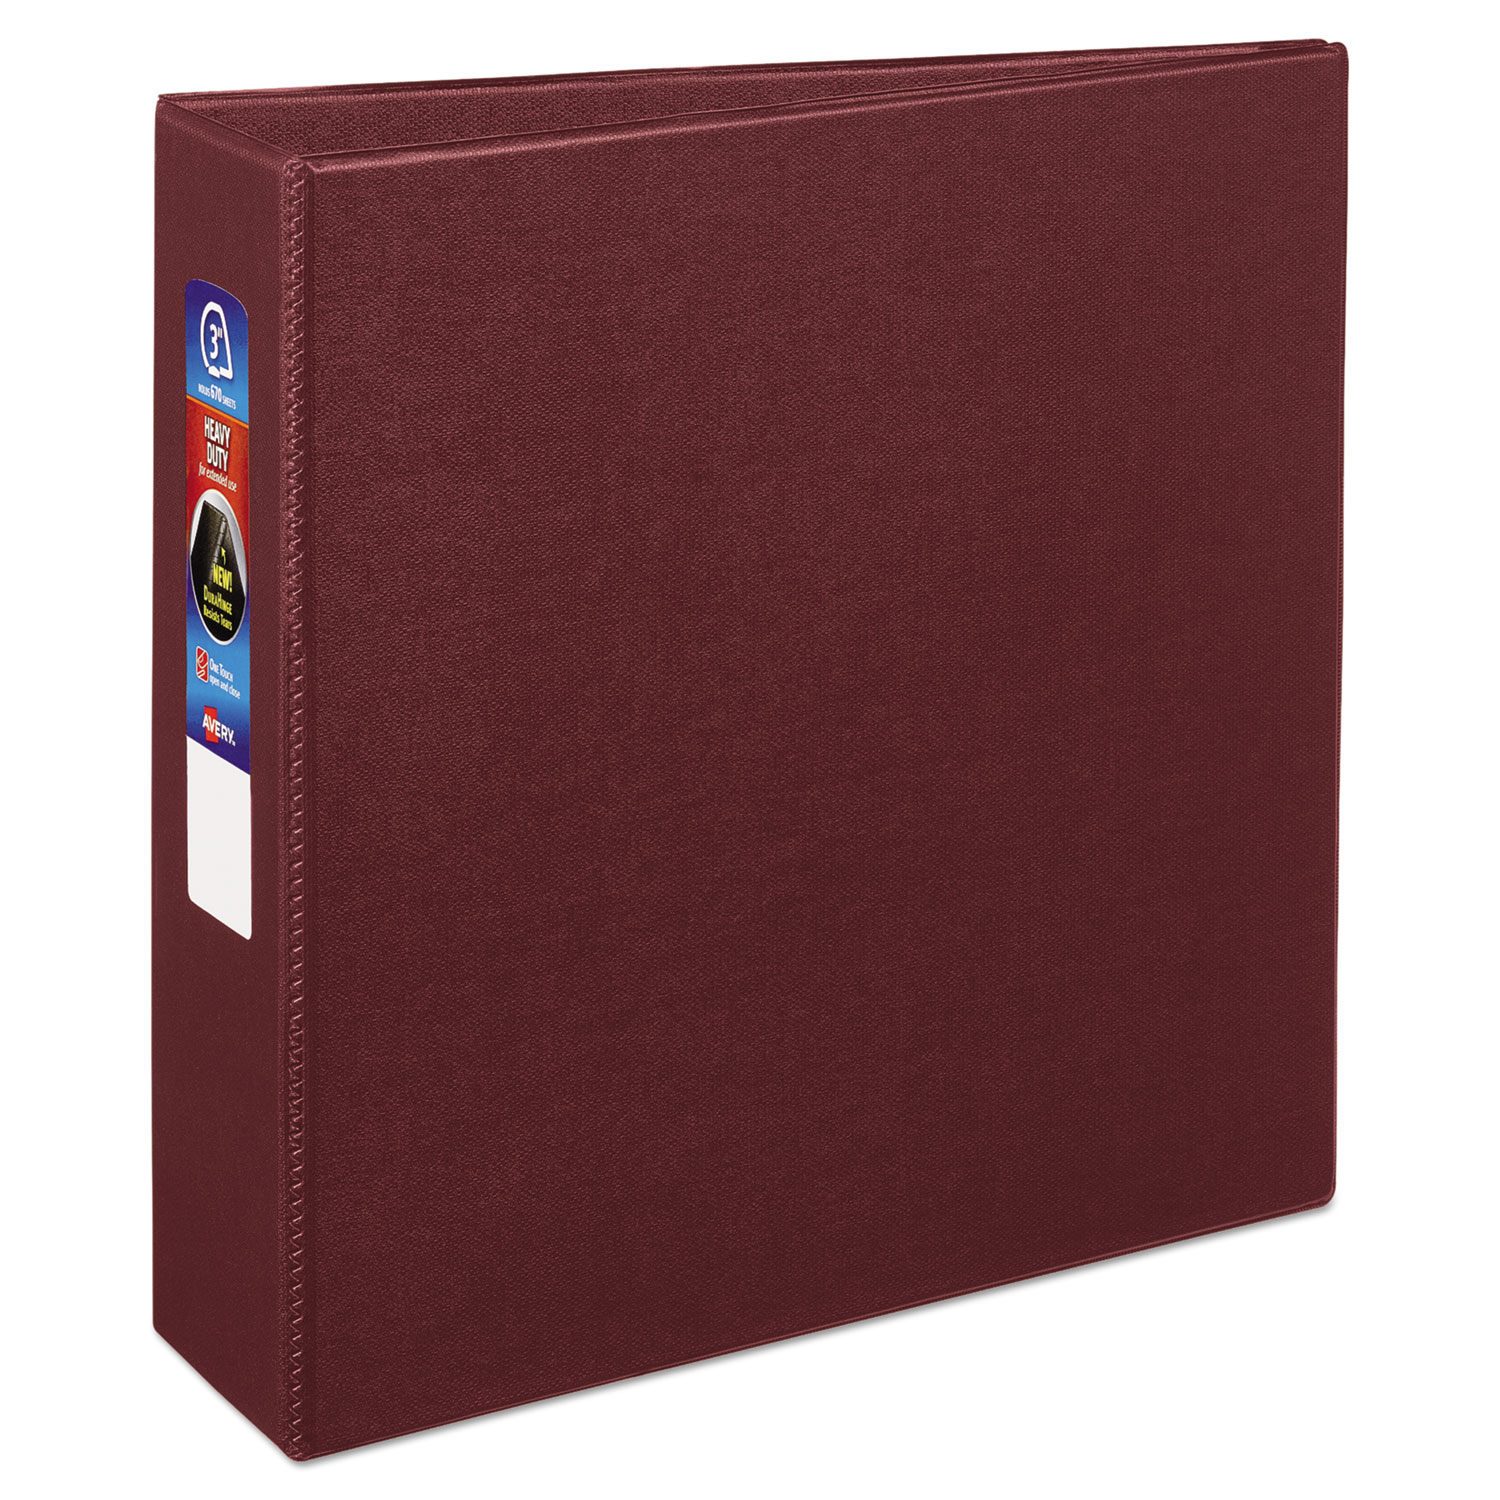  Avery 79363 Heavy-Duty Non-View Binder with DuraHinge and Locking One Touch EZD Rings, 3 Rings, 3 Capacity, 11 x 8.5, Maroon (AVE79363) 